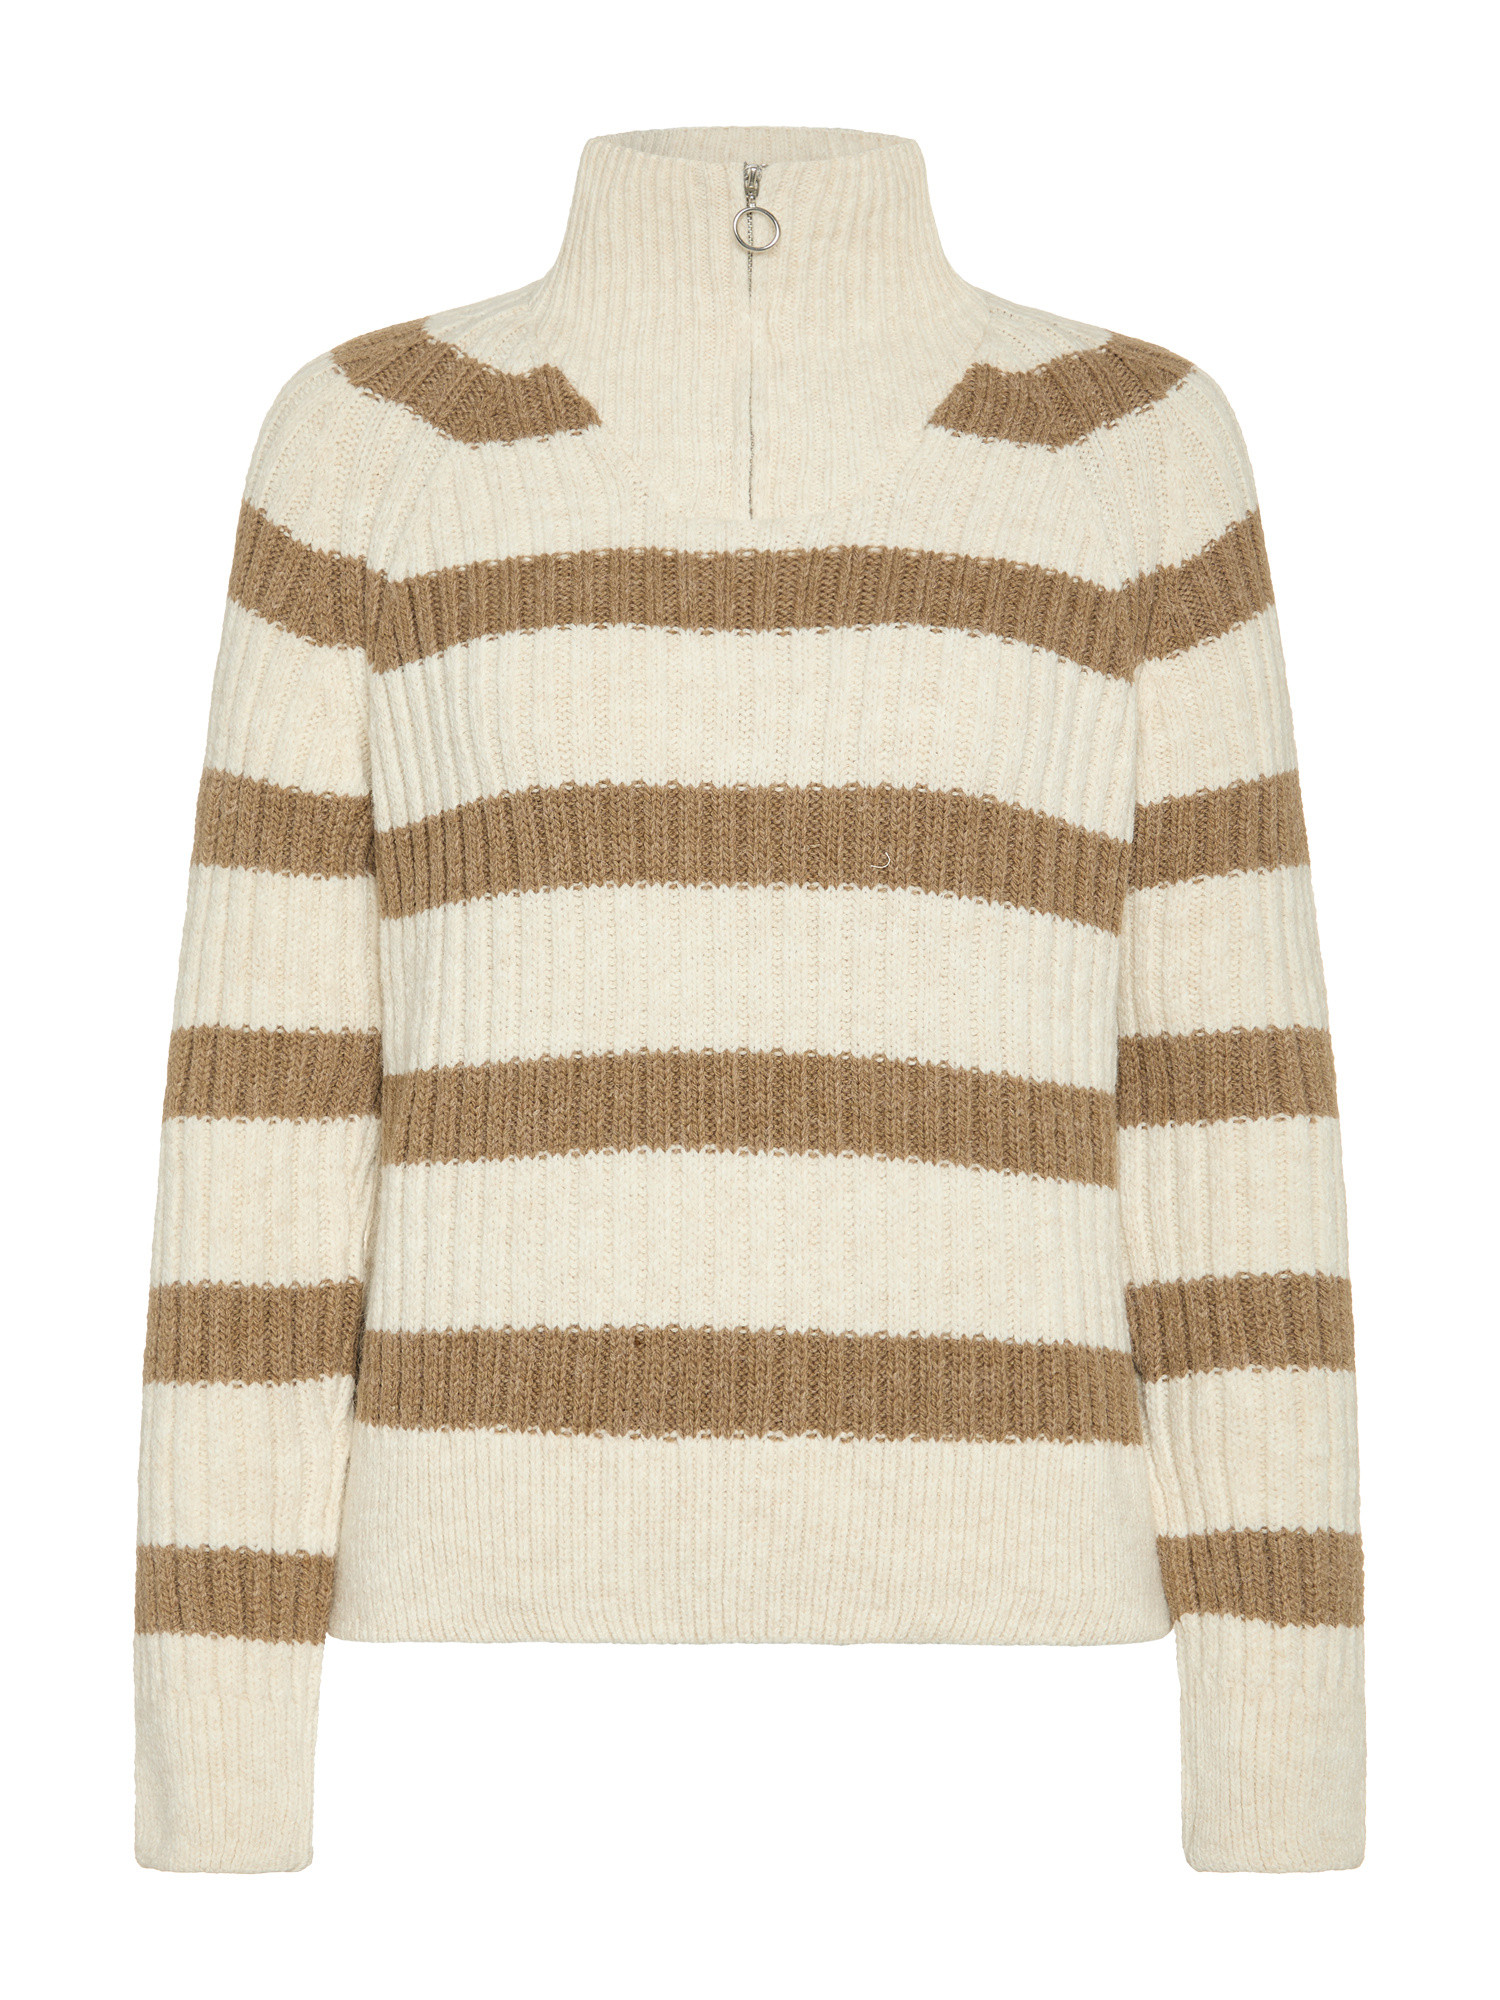 Only - Pullover mezza zip a righe, Beige, large image number 0